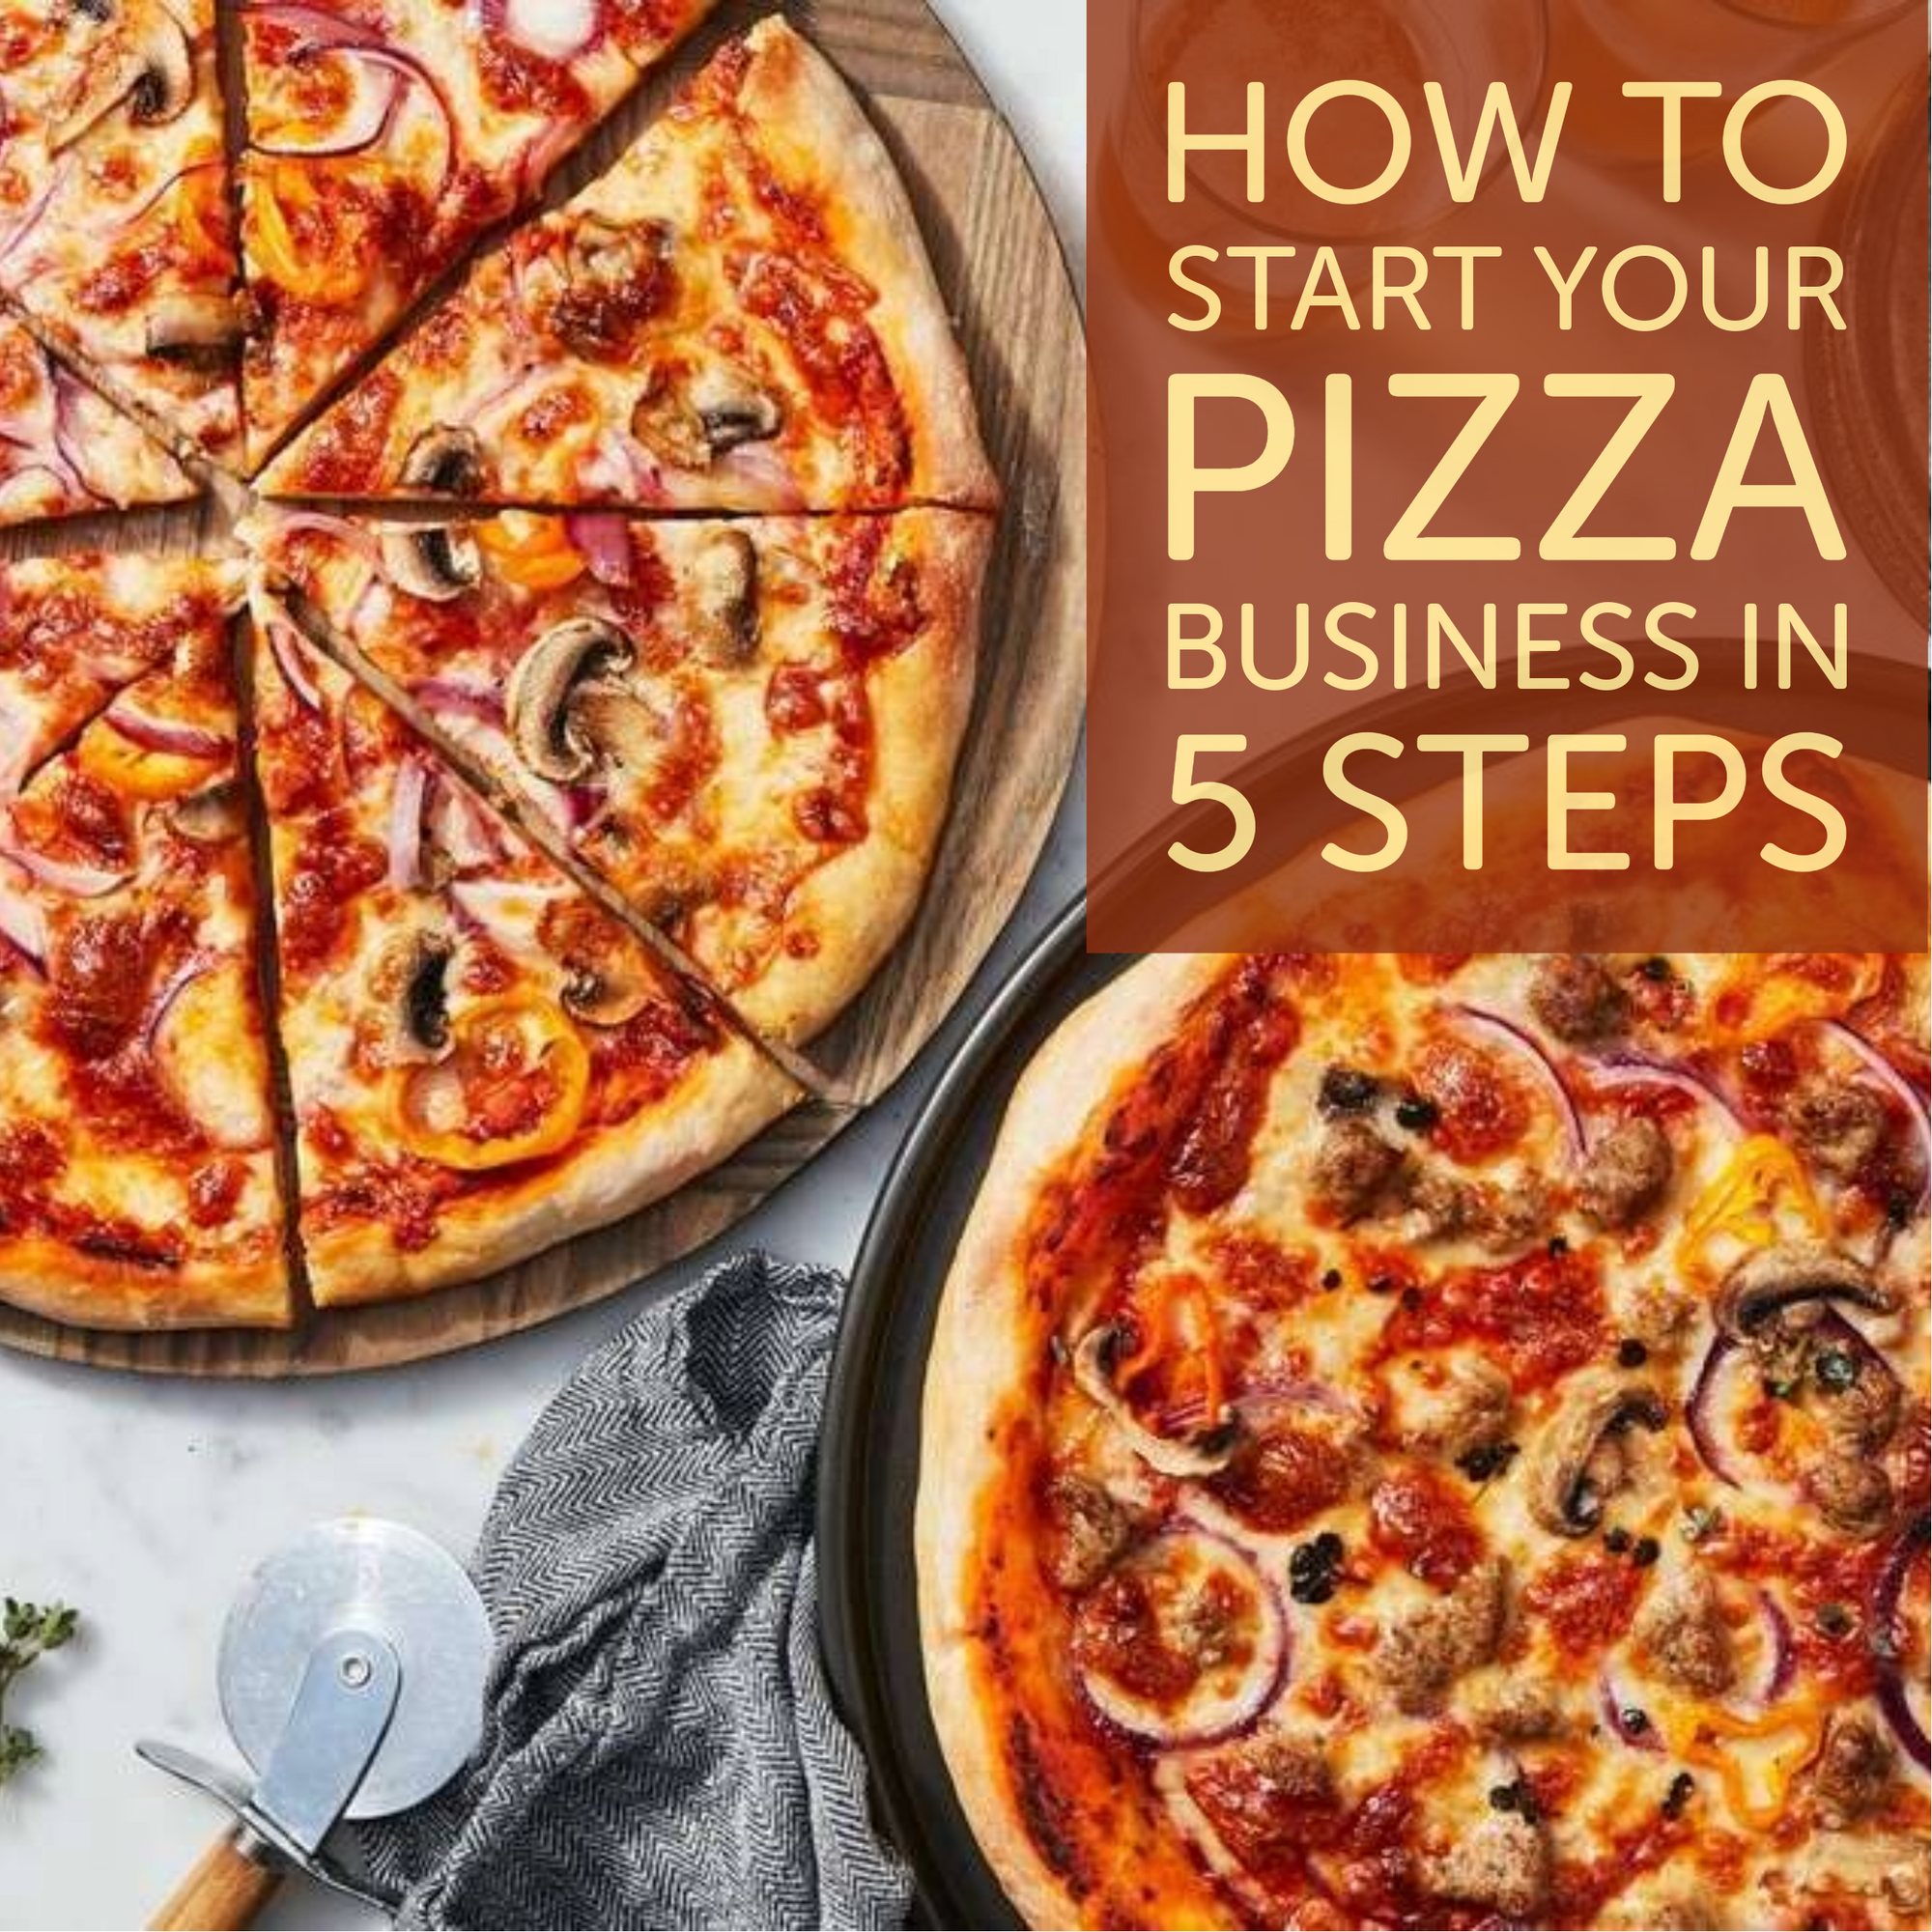 How to Start a Pizza Business in 5 Steps